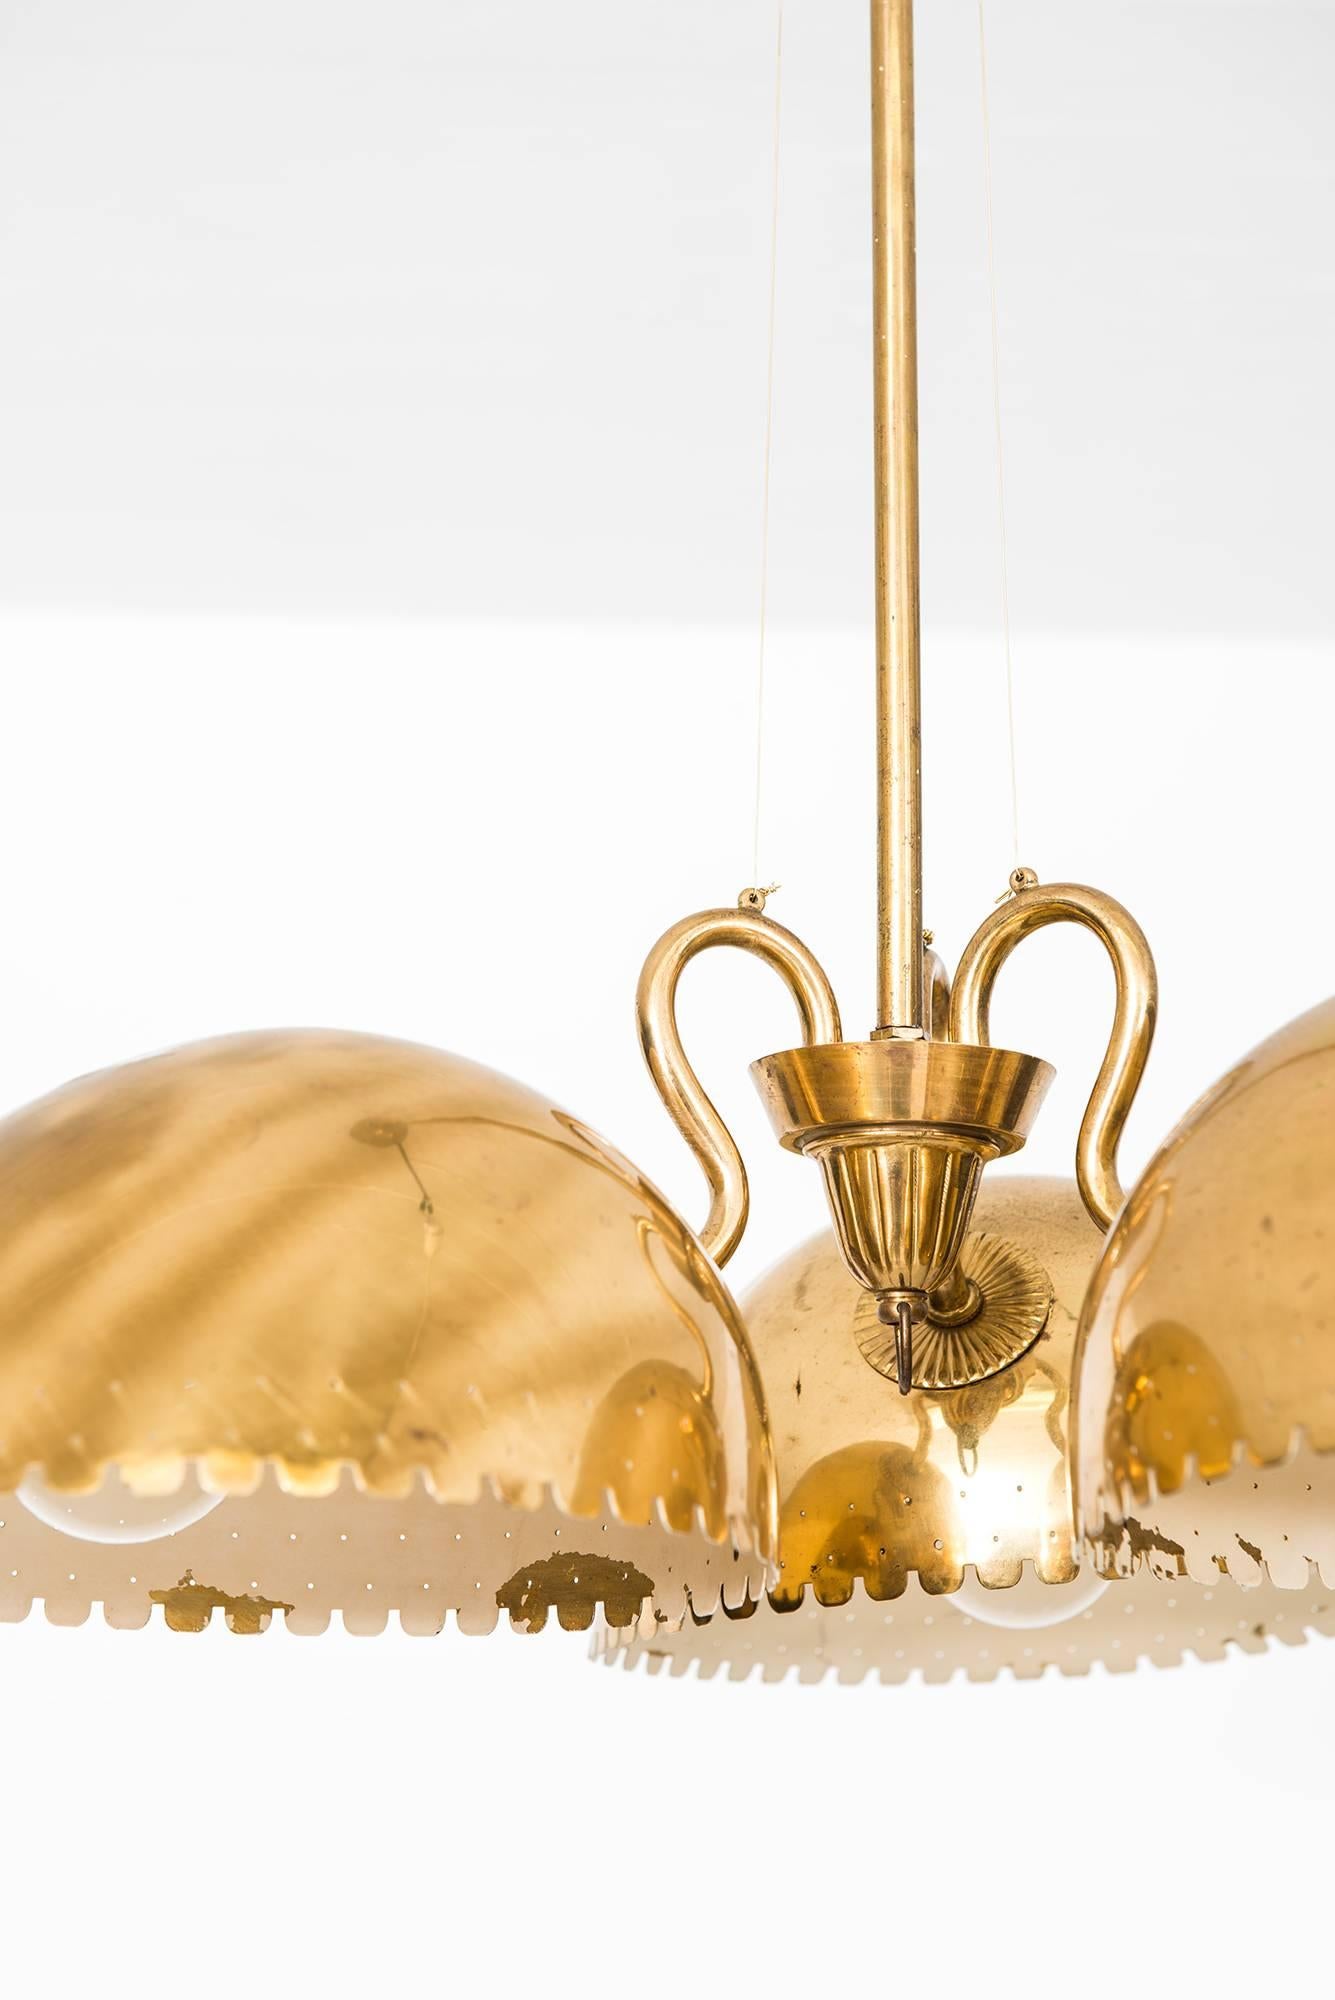 Rare ceiling lamp designed by Carl-Axel Acking. Produced by Bröderna Malmströms Metallvarufabrik in Sweden.